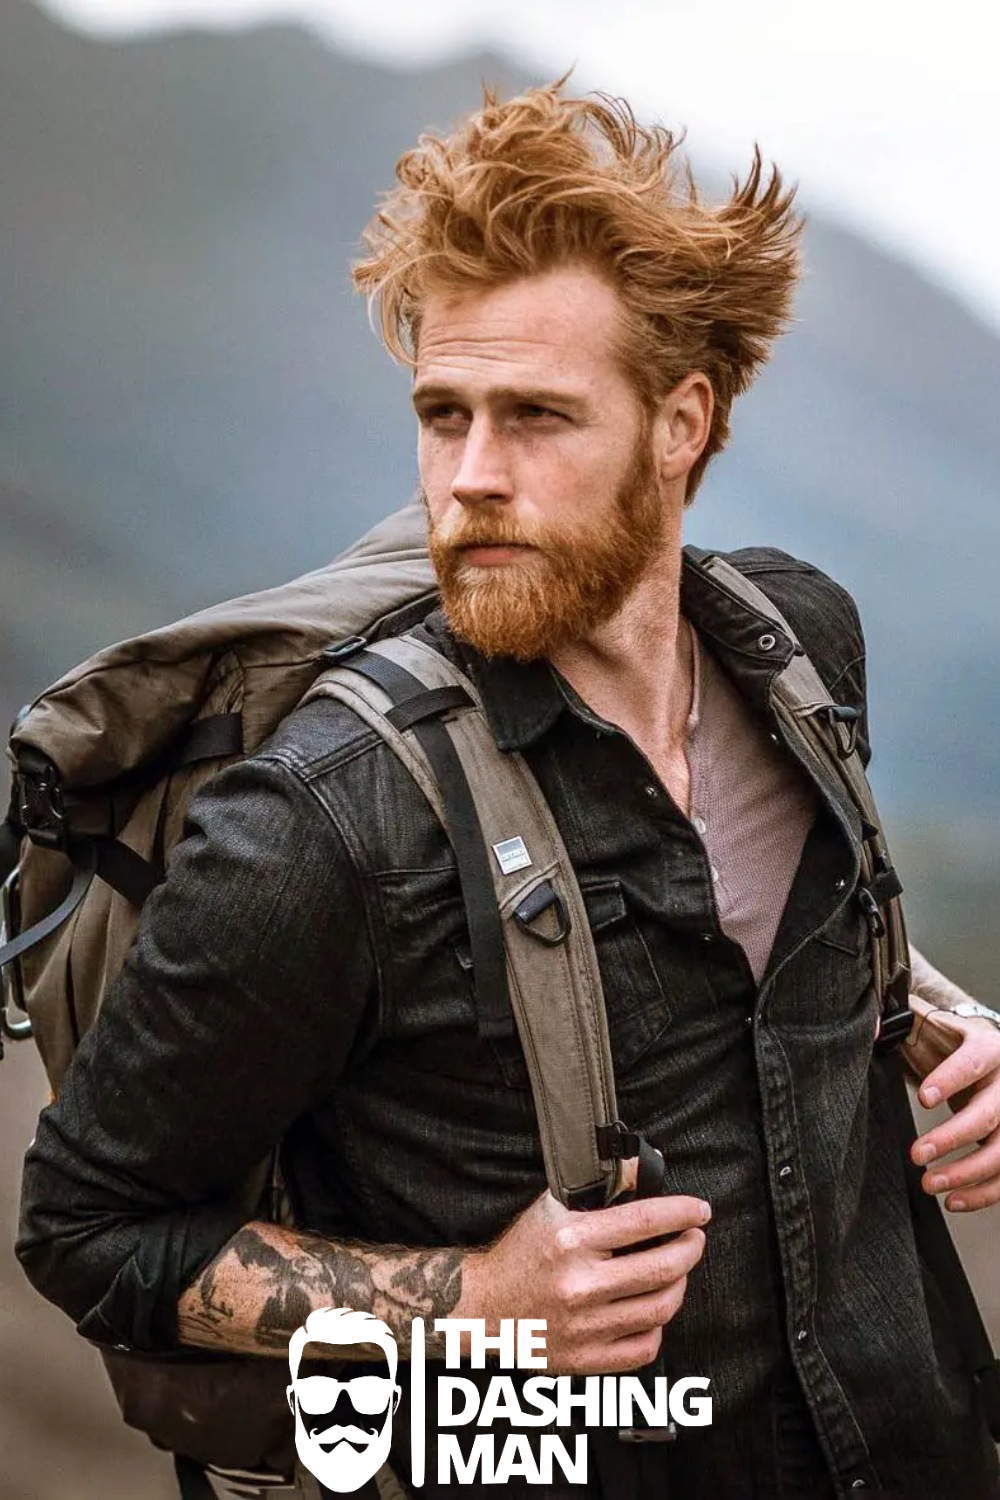 10 Best Red Hair Men's Hairstyles for a Striking Look